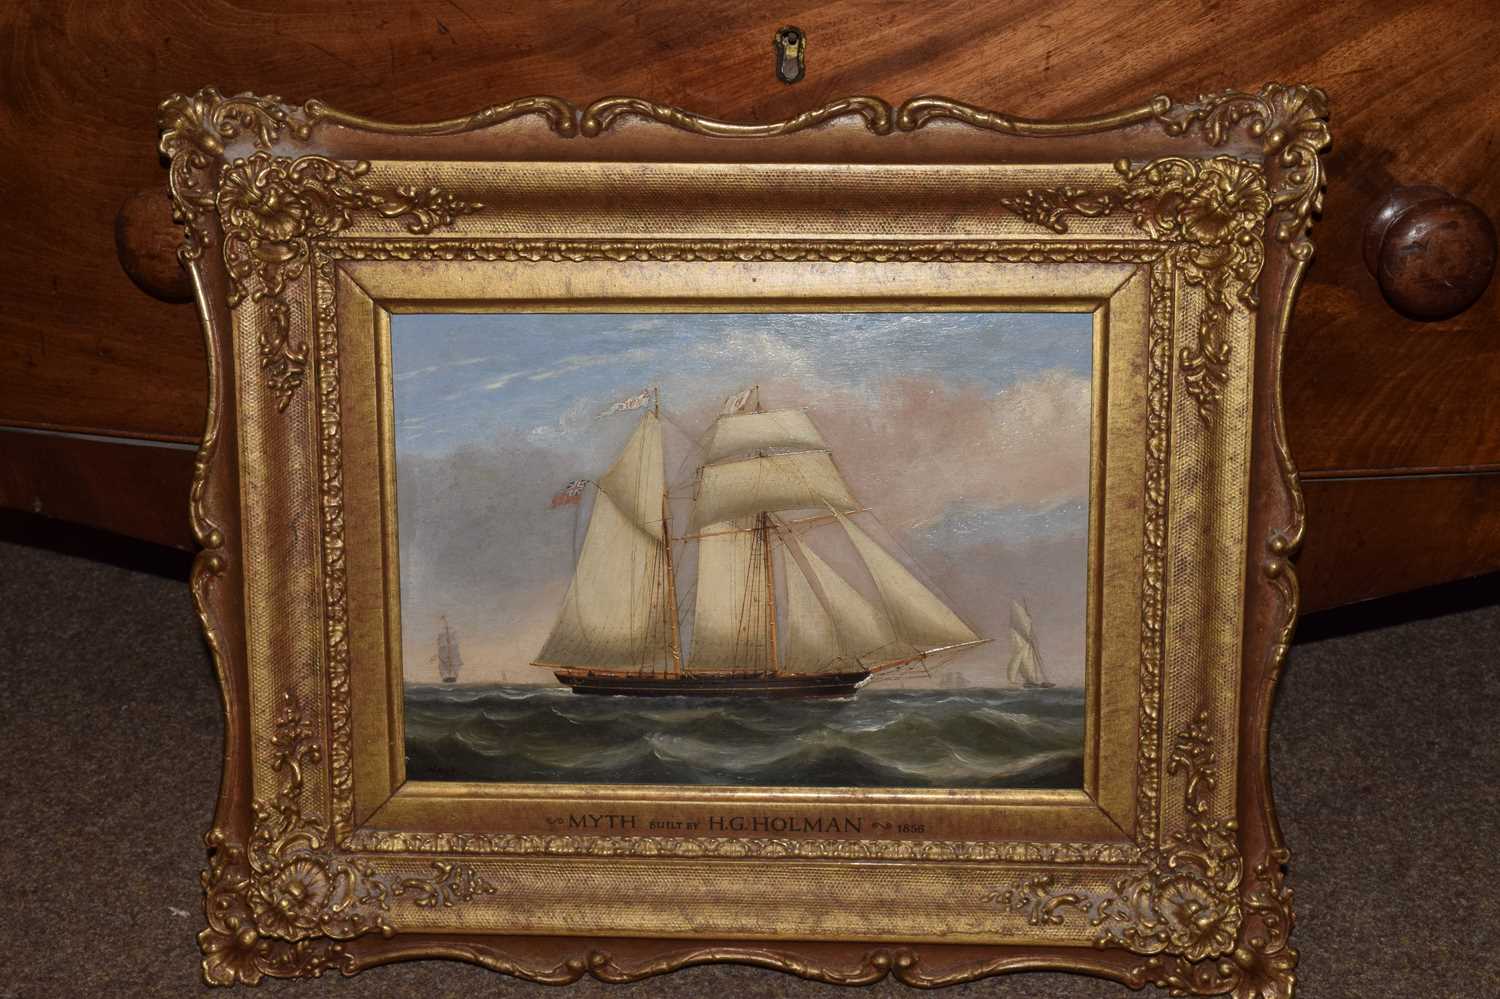 Oil on board - 'Myth', built by H. G. Holman - Image 6 of 9